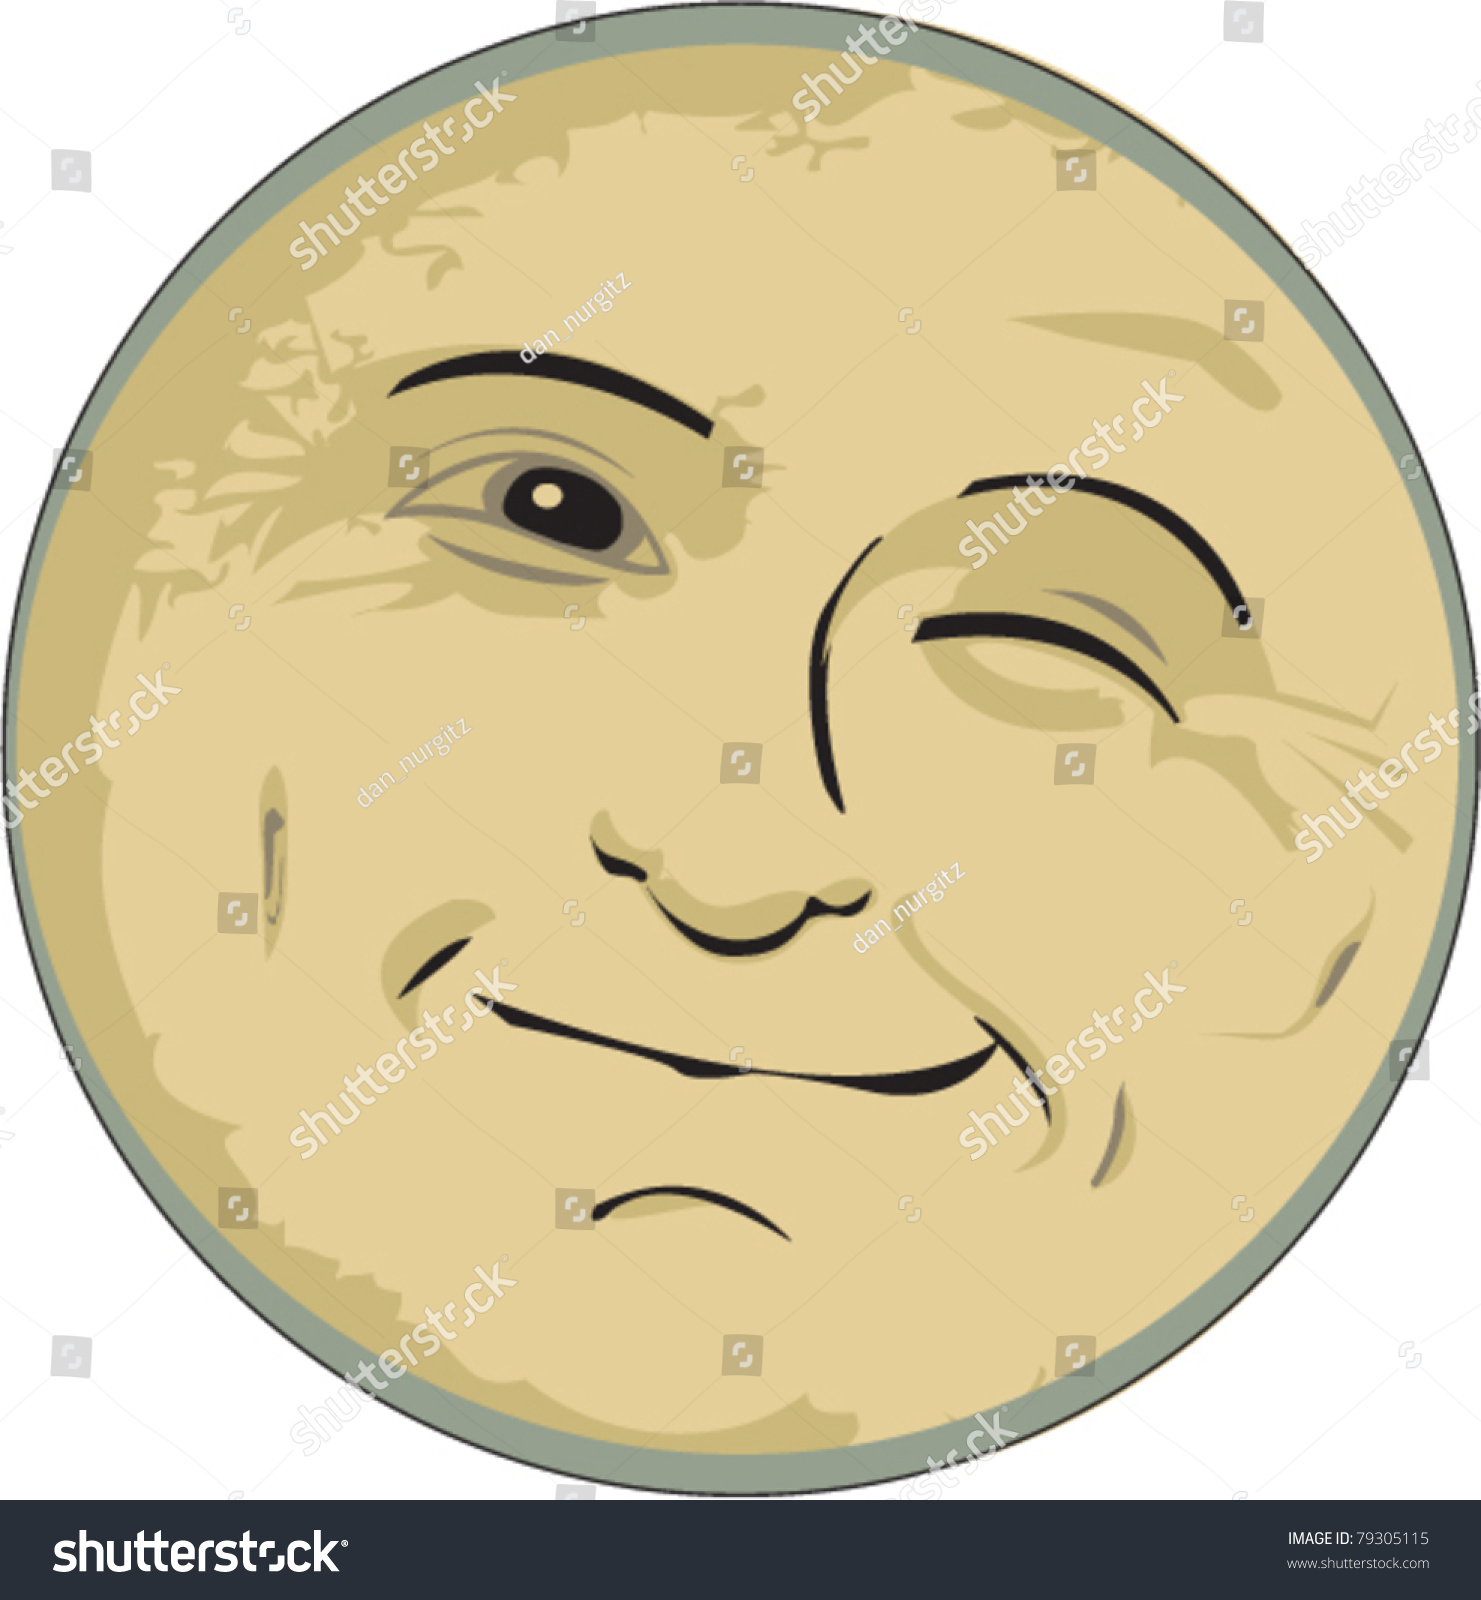 man in the moon clipart - photo #46